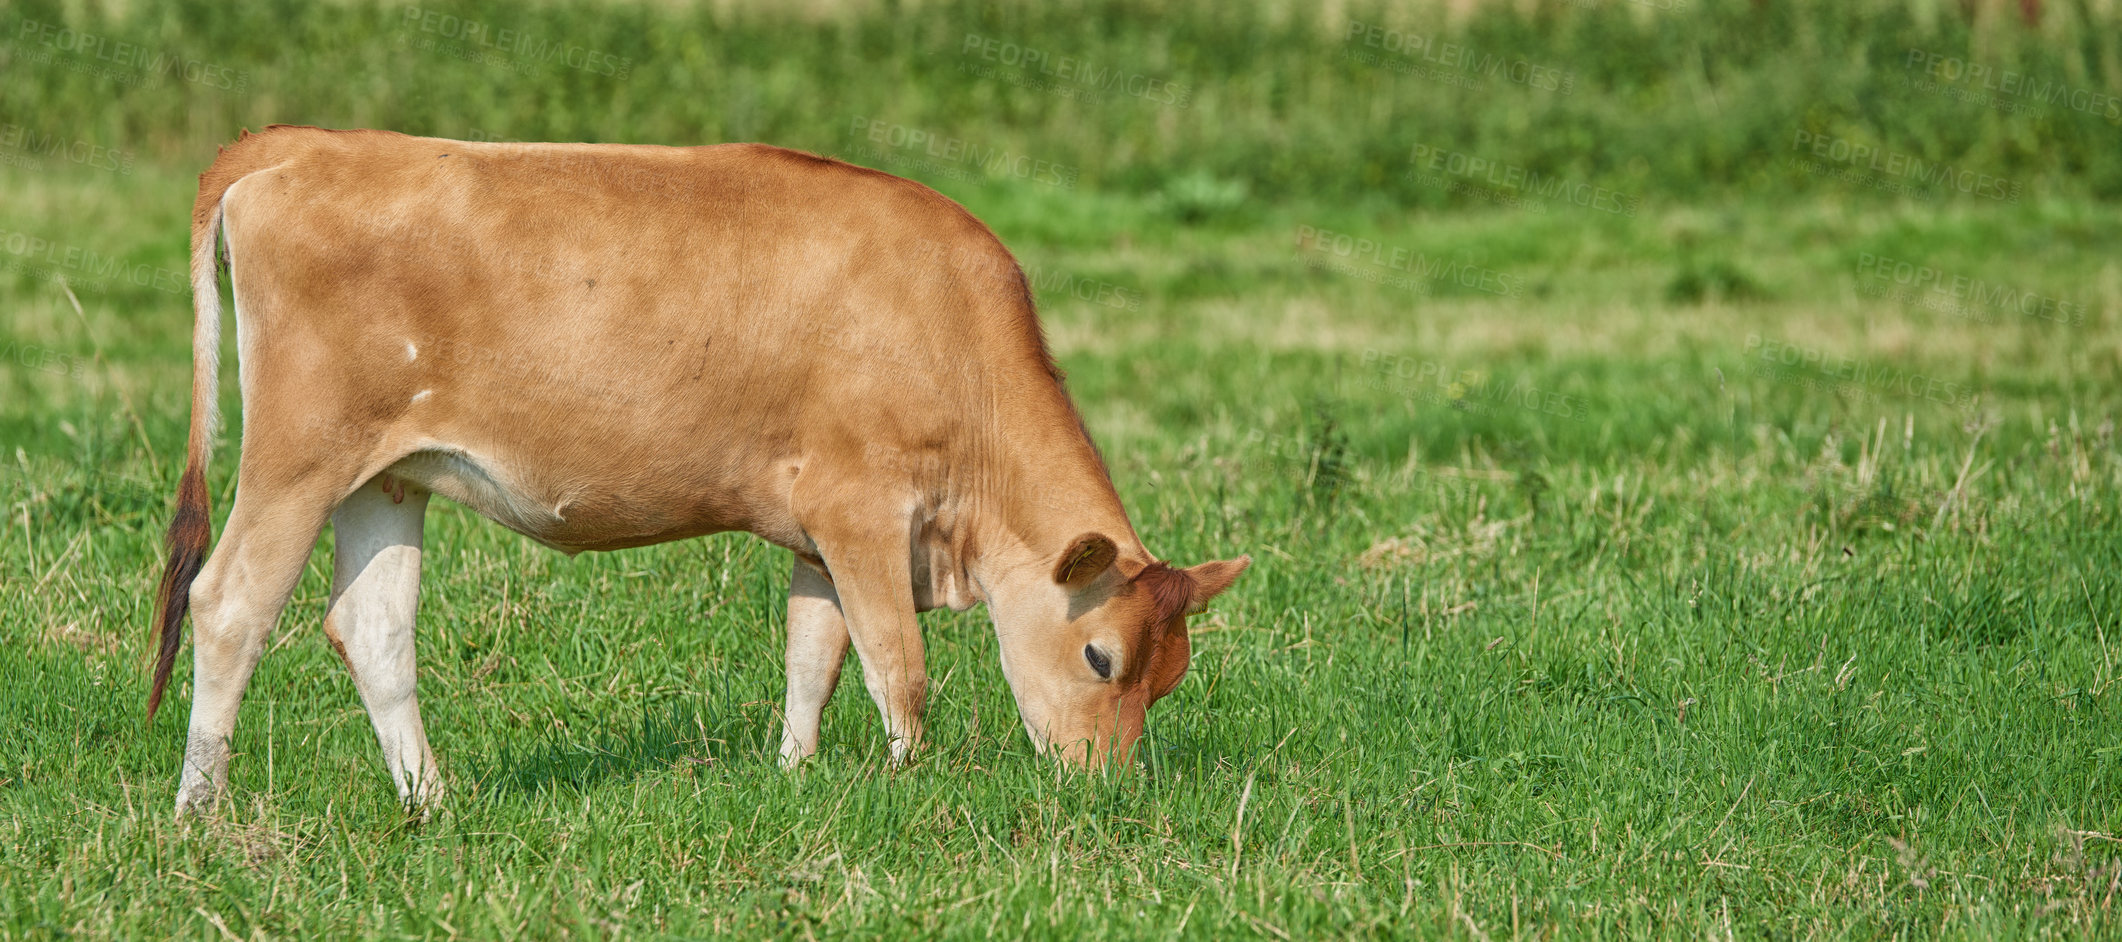 Buy stock photo A brown cow grazing on an organic green dairy farm in the countryside. Cattle or livestock in an open, empty and vast grassy field or meadow. Bovine animals on agricultural and sustainable land